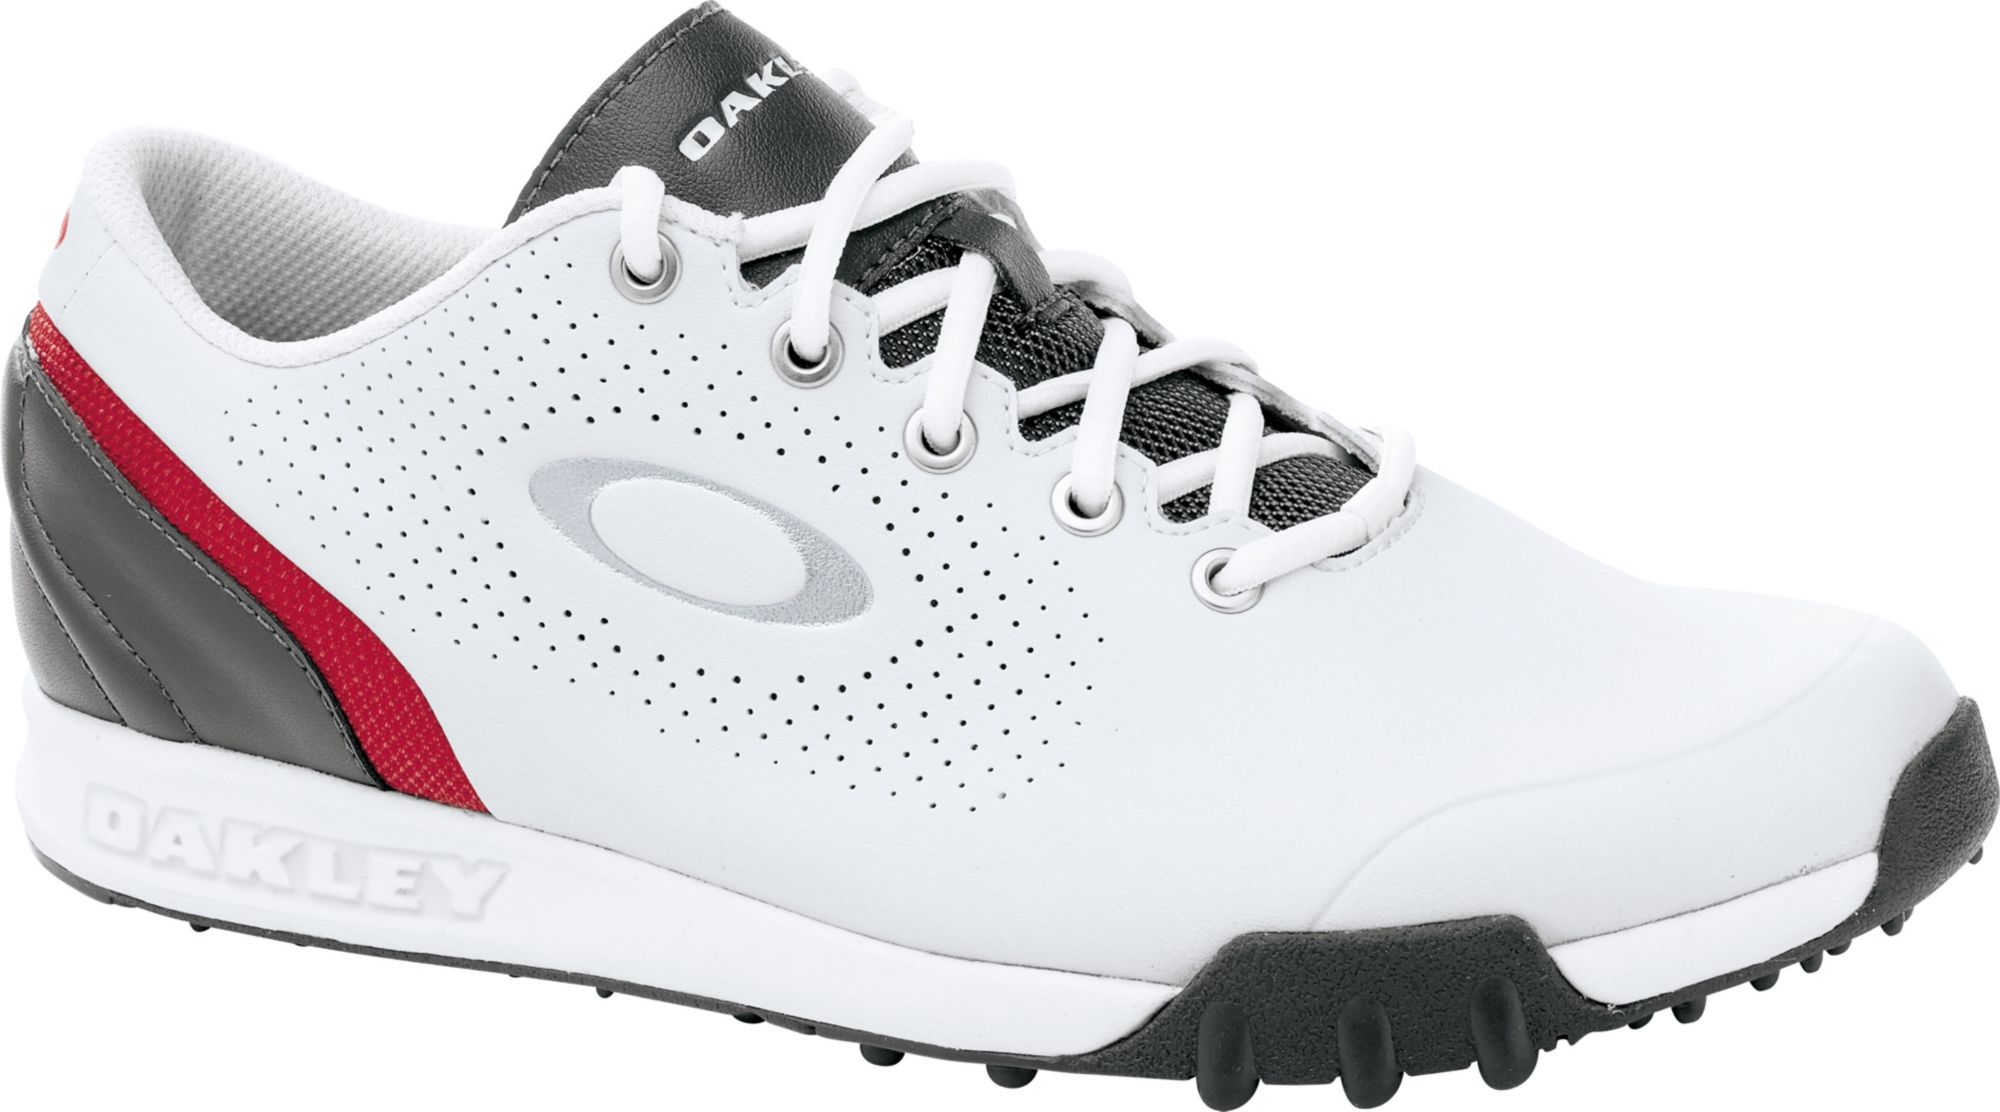 Oakley Men's Ripcord Golf Shoe - White/Charcoal at Golf Galaxy